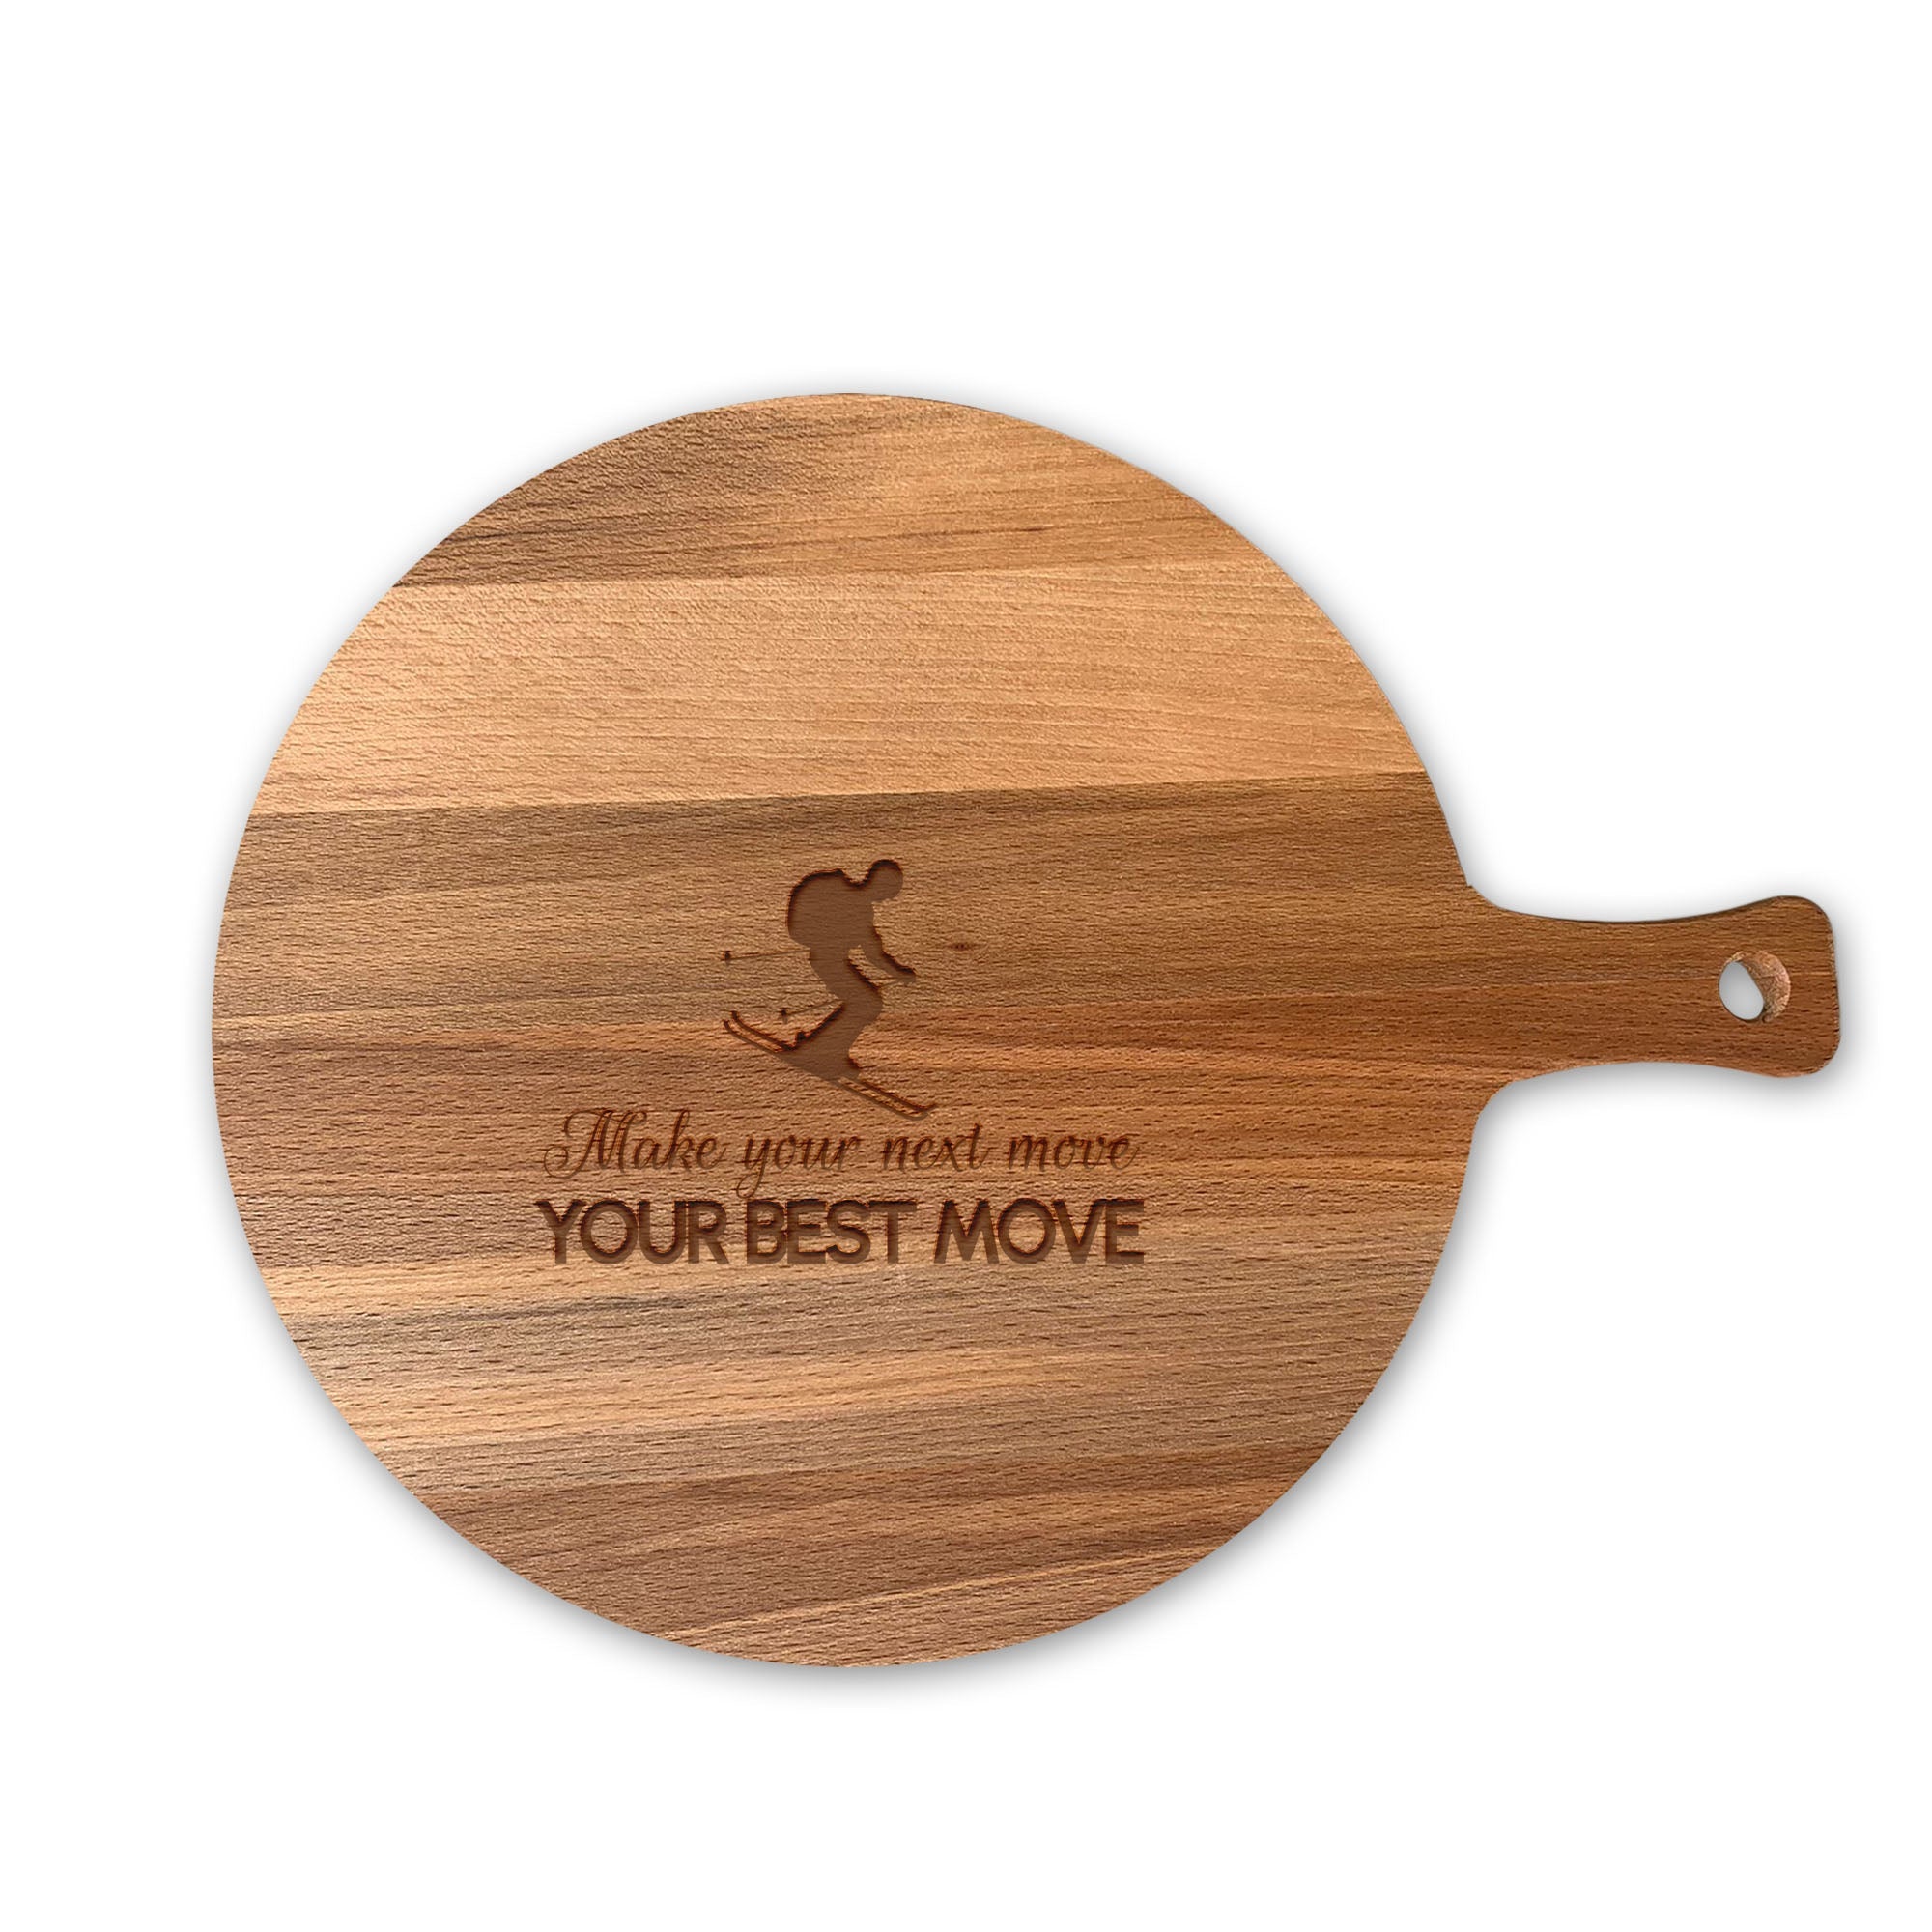 Serveerplank Rond Skiën Make Your Next Move Your Best Move